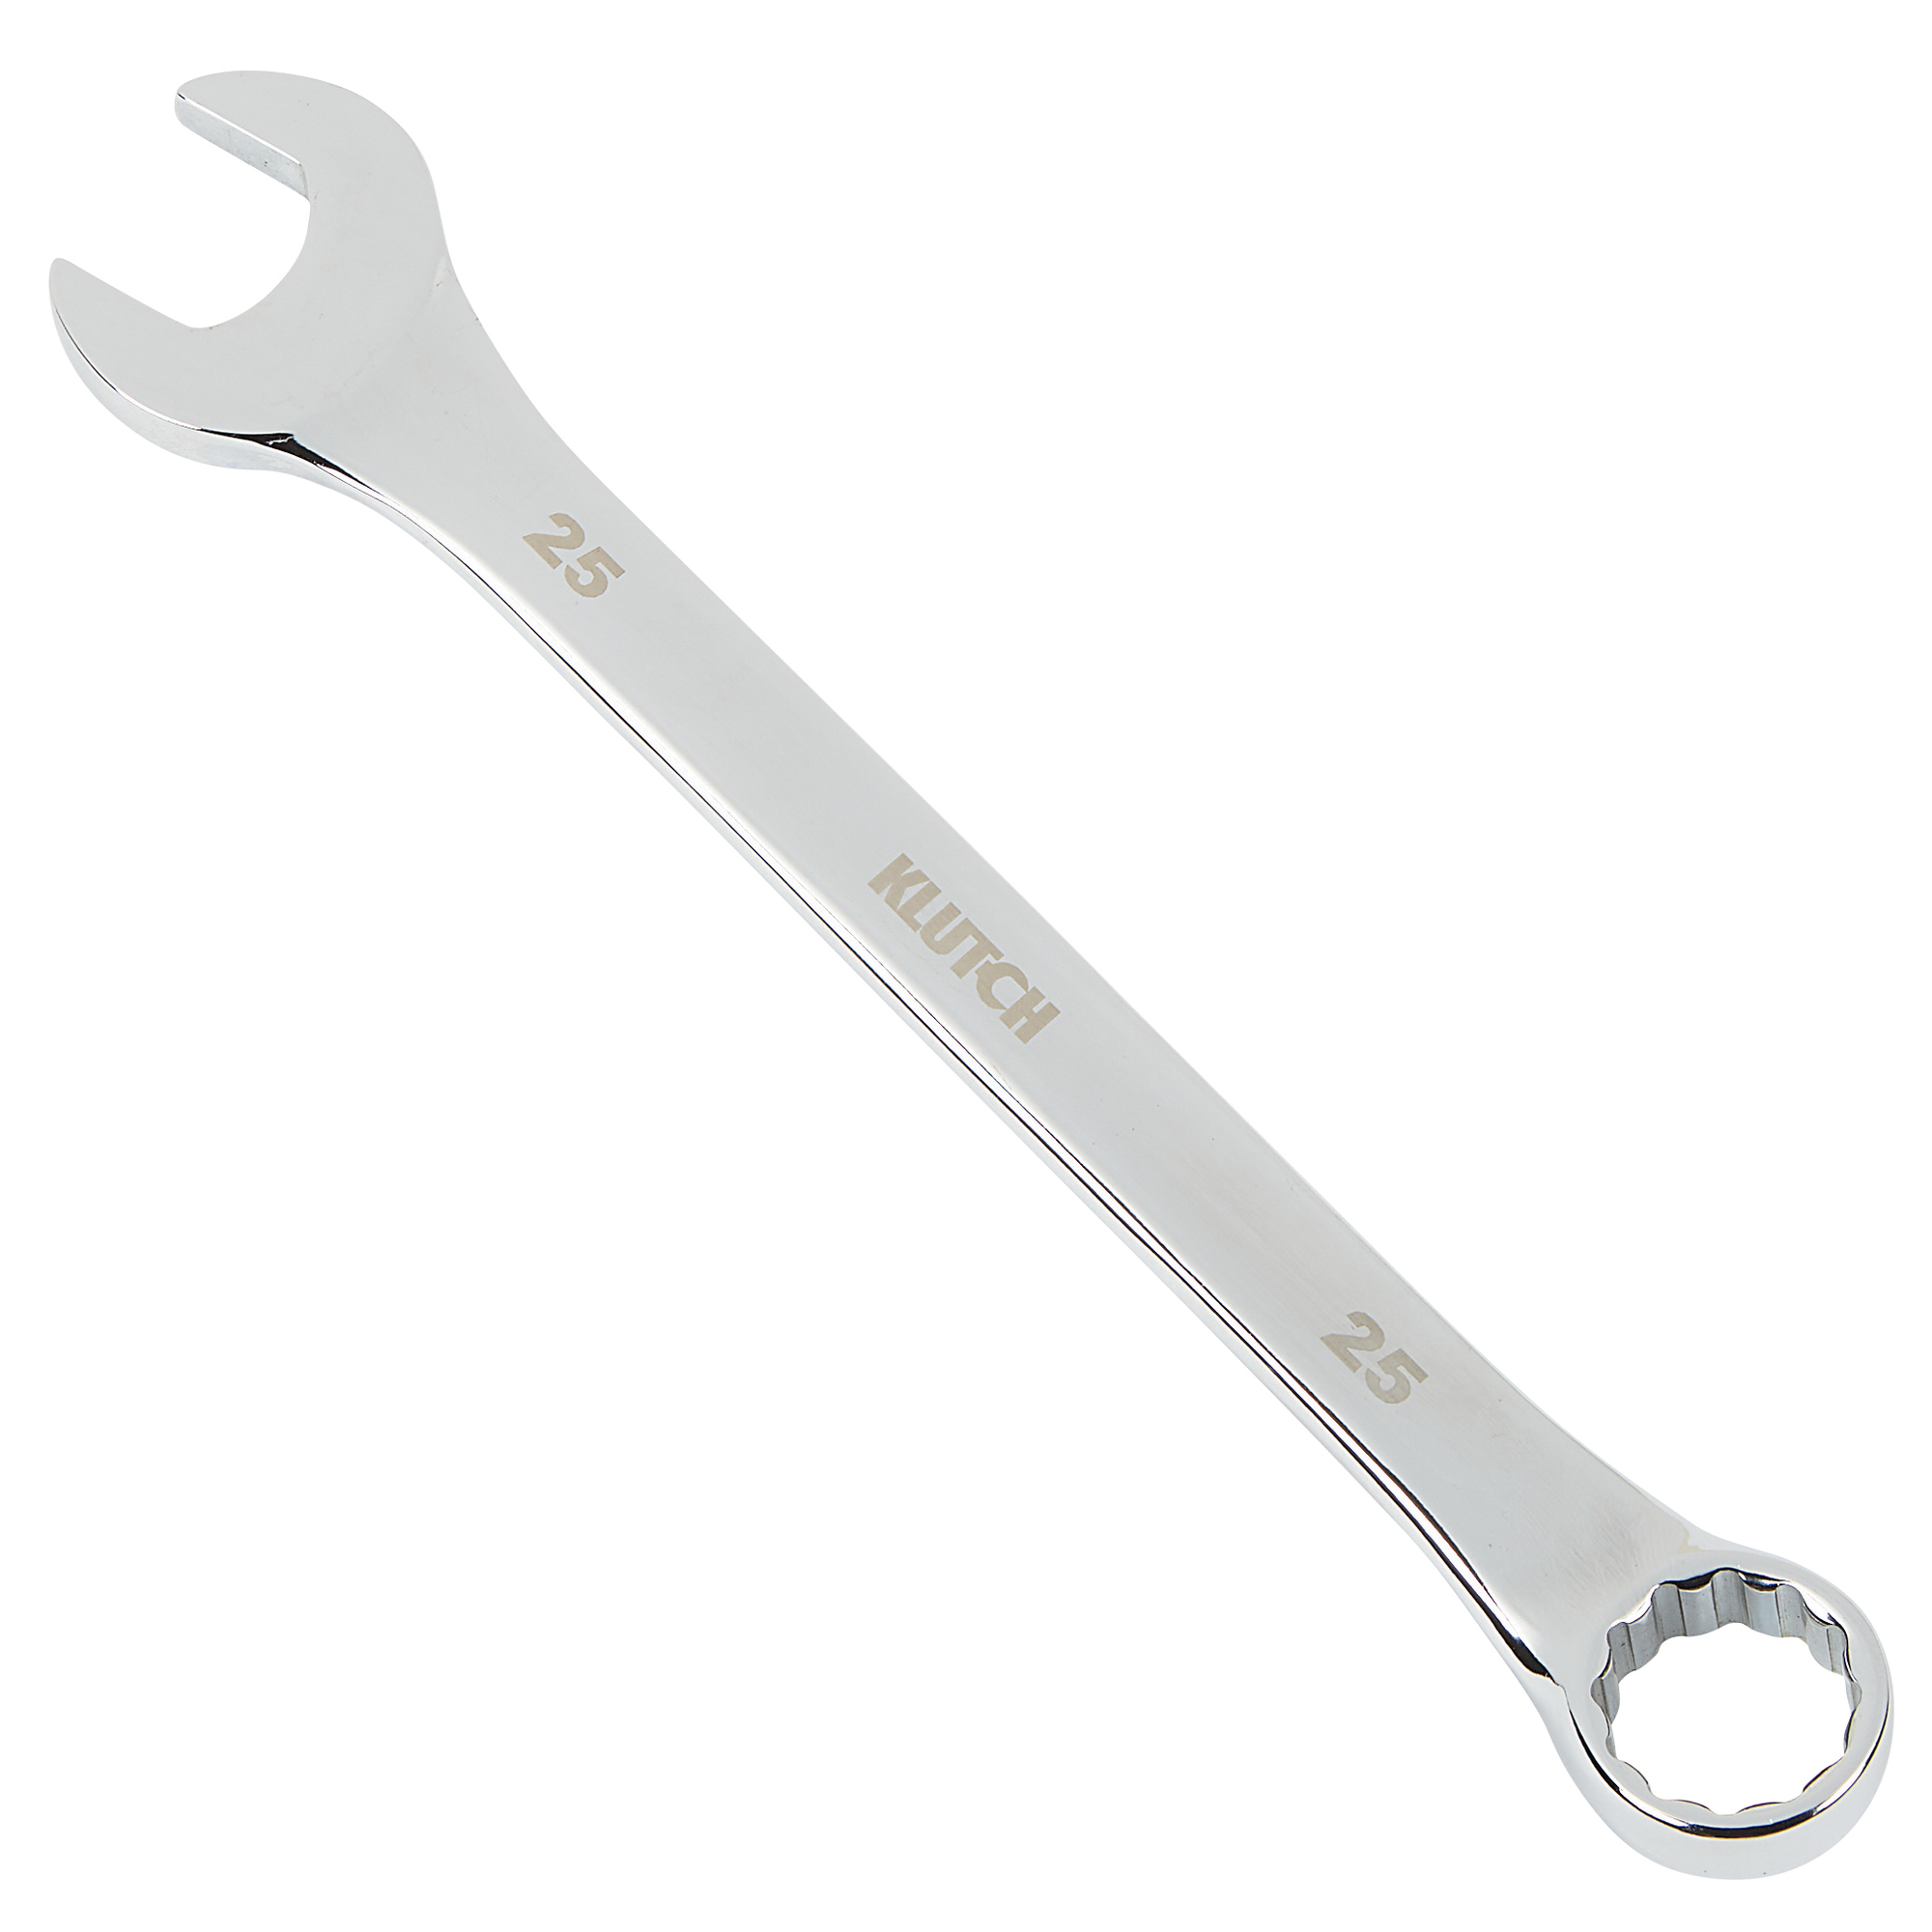 Klutch Metric Combination Wrench, 25mm x 10.94Inch, Model E-2004